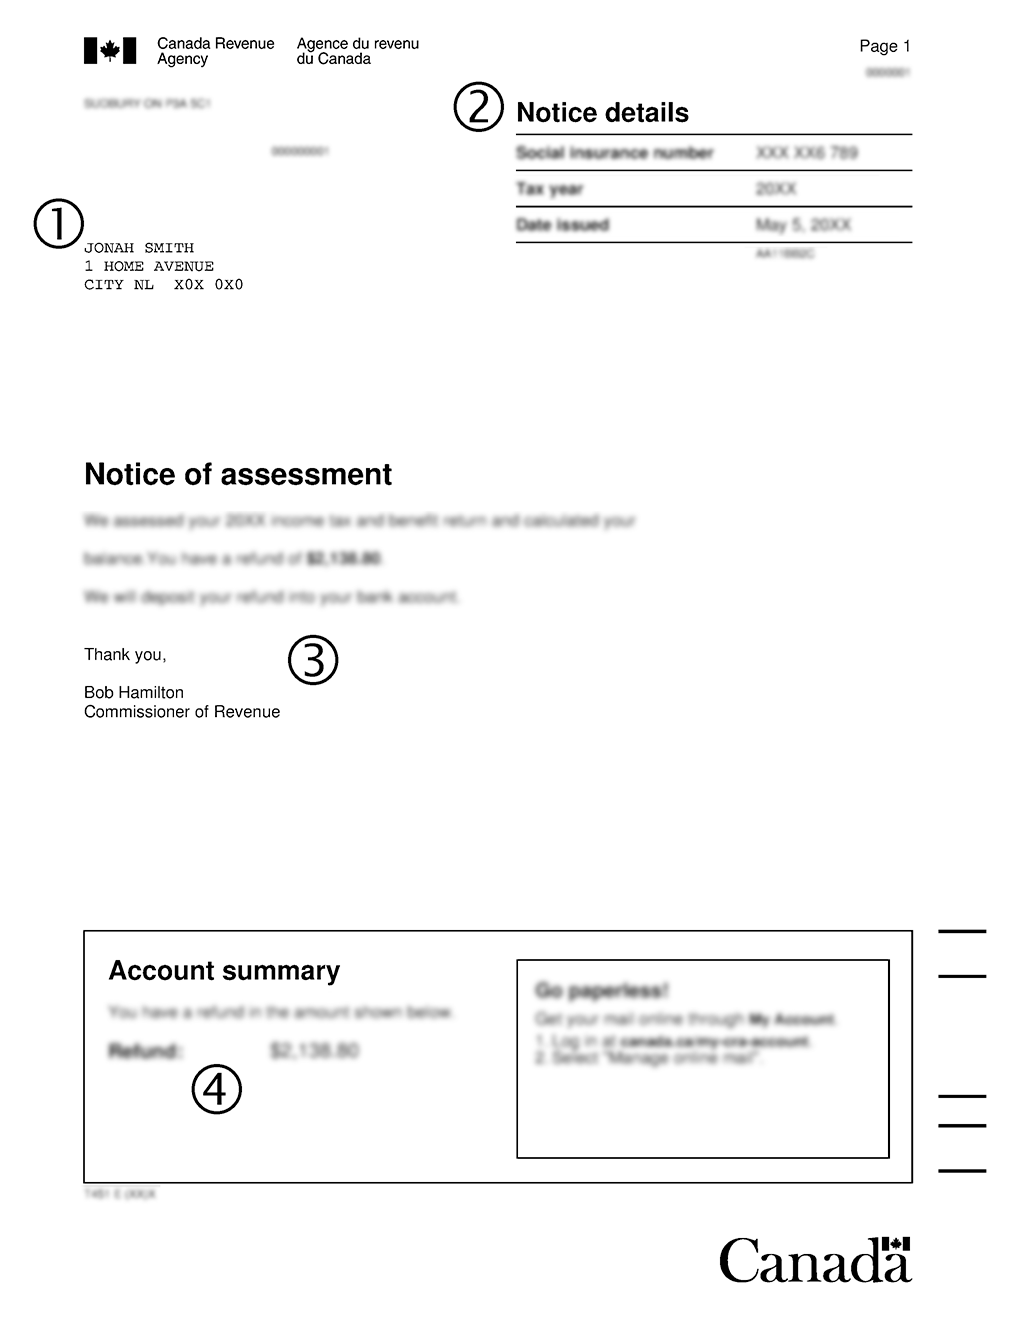 Page one of the notice of assessment, that contains notice details.